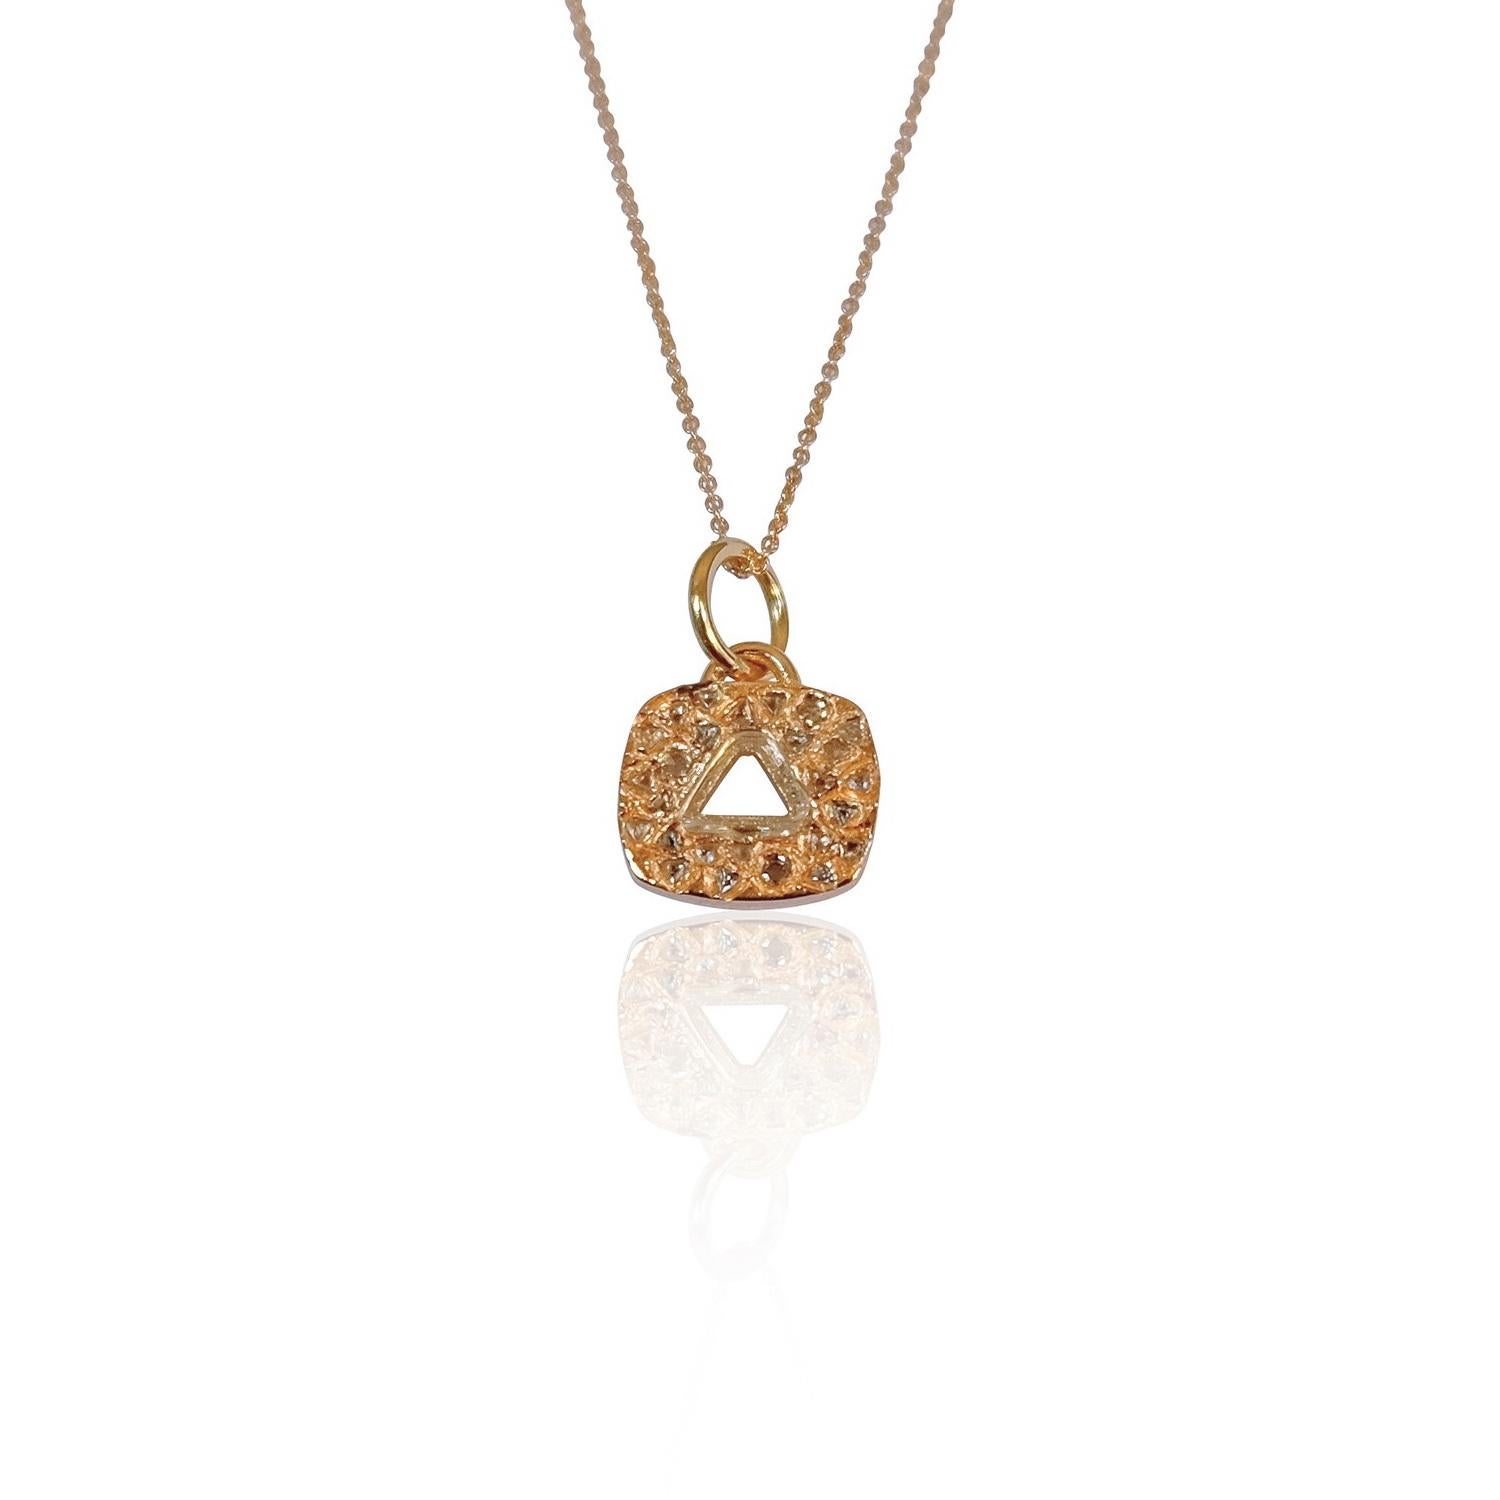 Luca Jouel Triangular Diamond Necklace in Rose Gold In New Condition For Sale In South Perth, AU